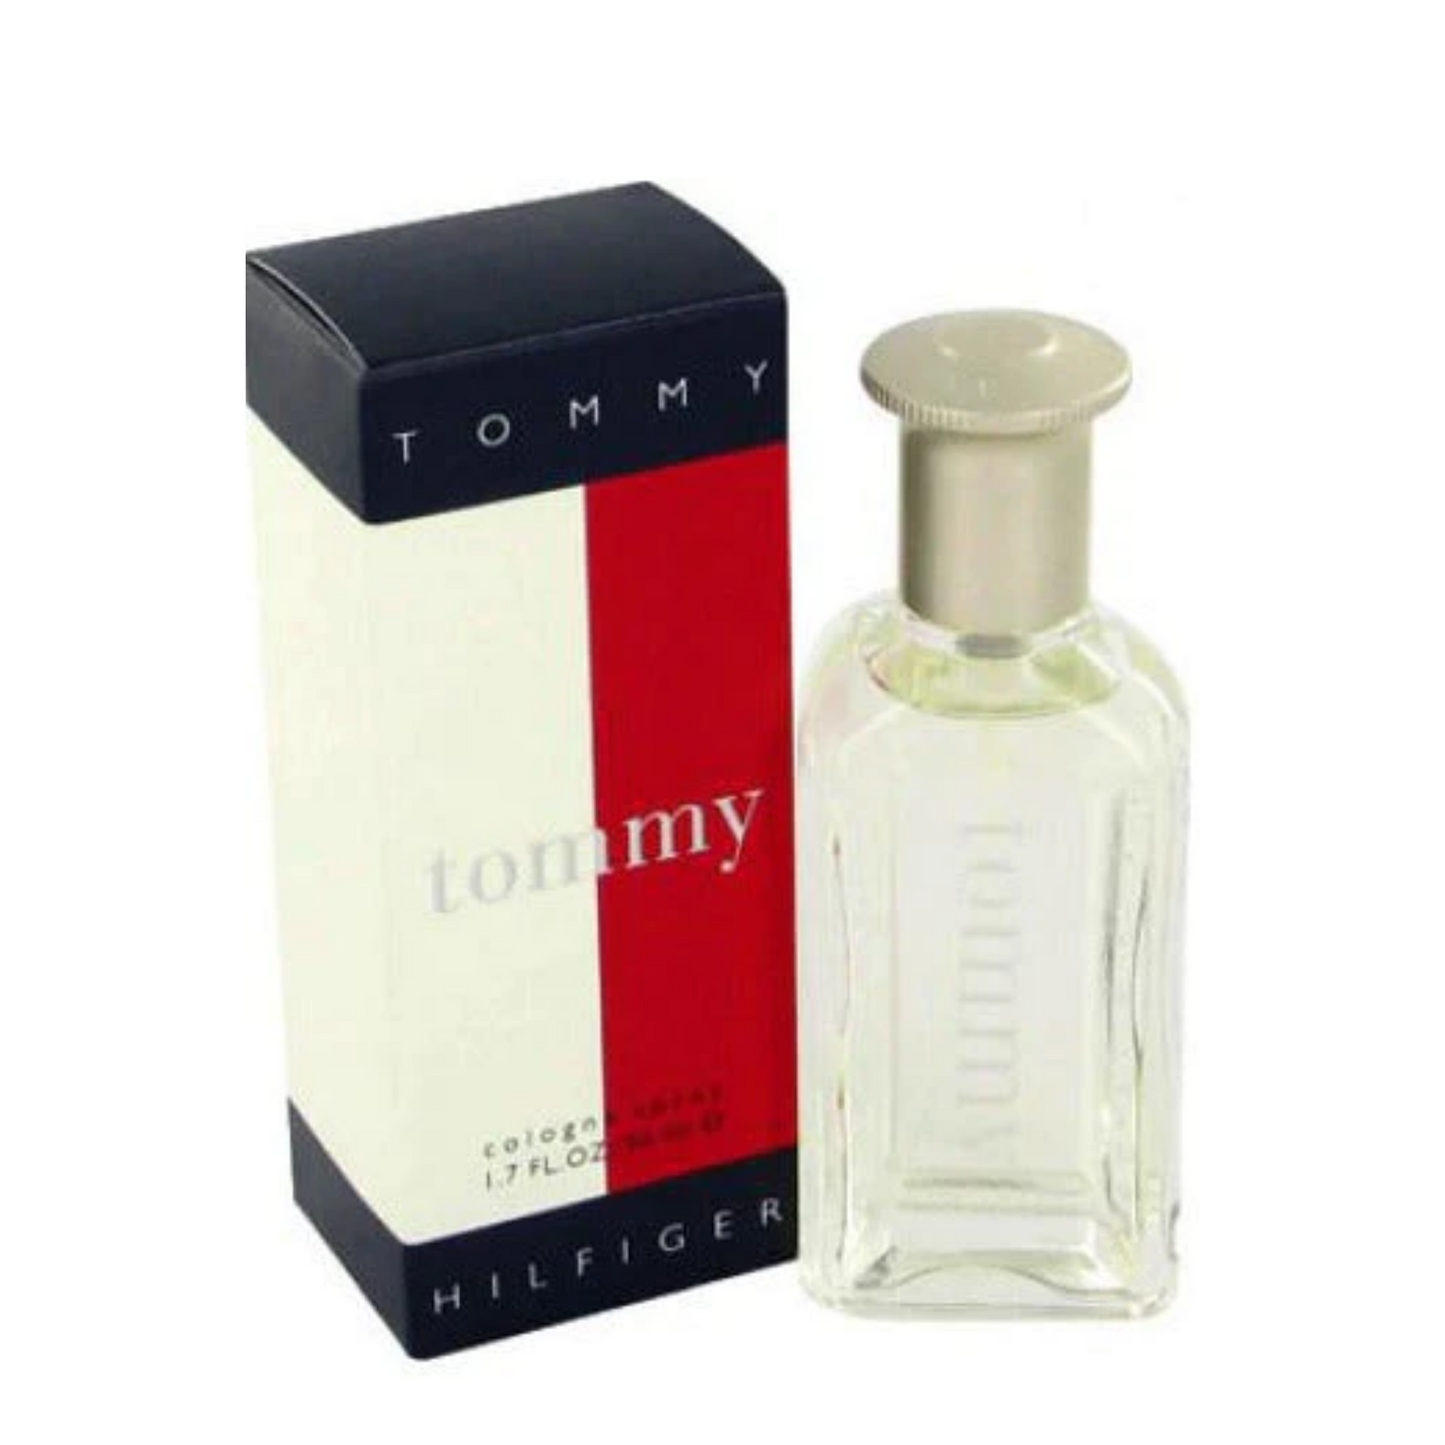 Tommy Boy type Perfume for Men